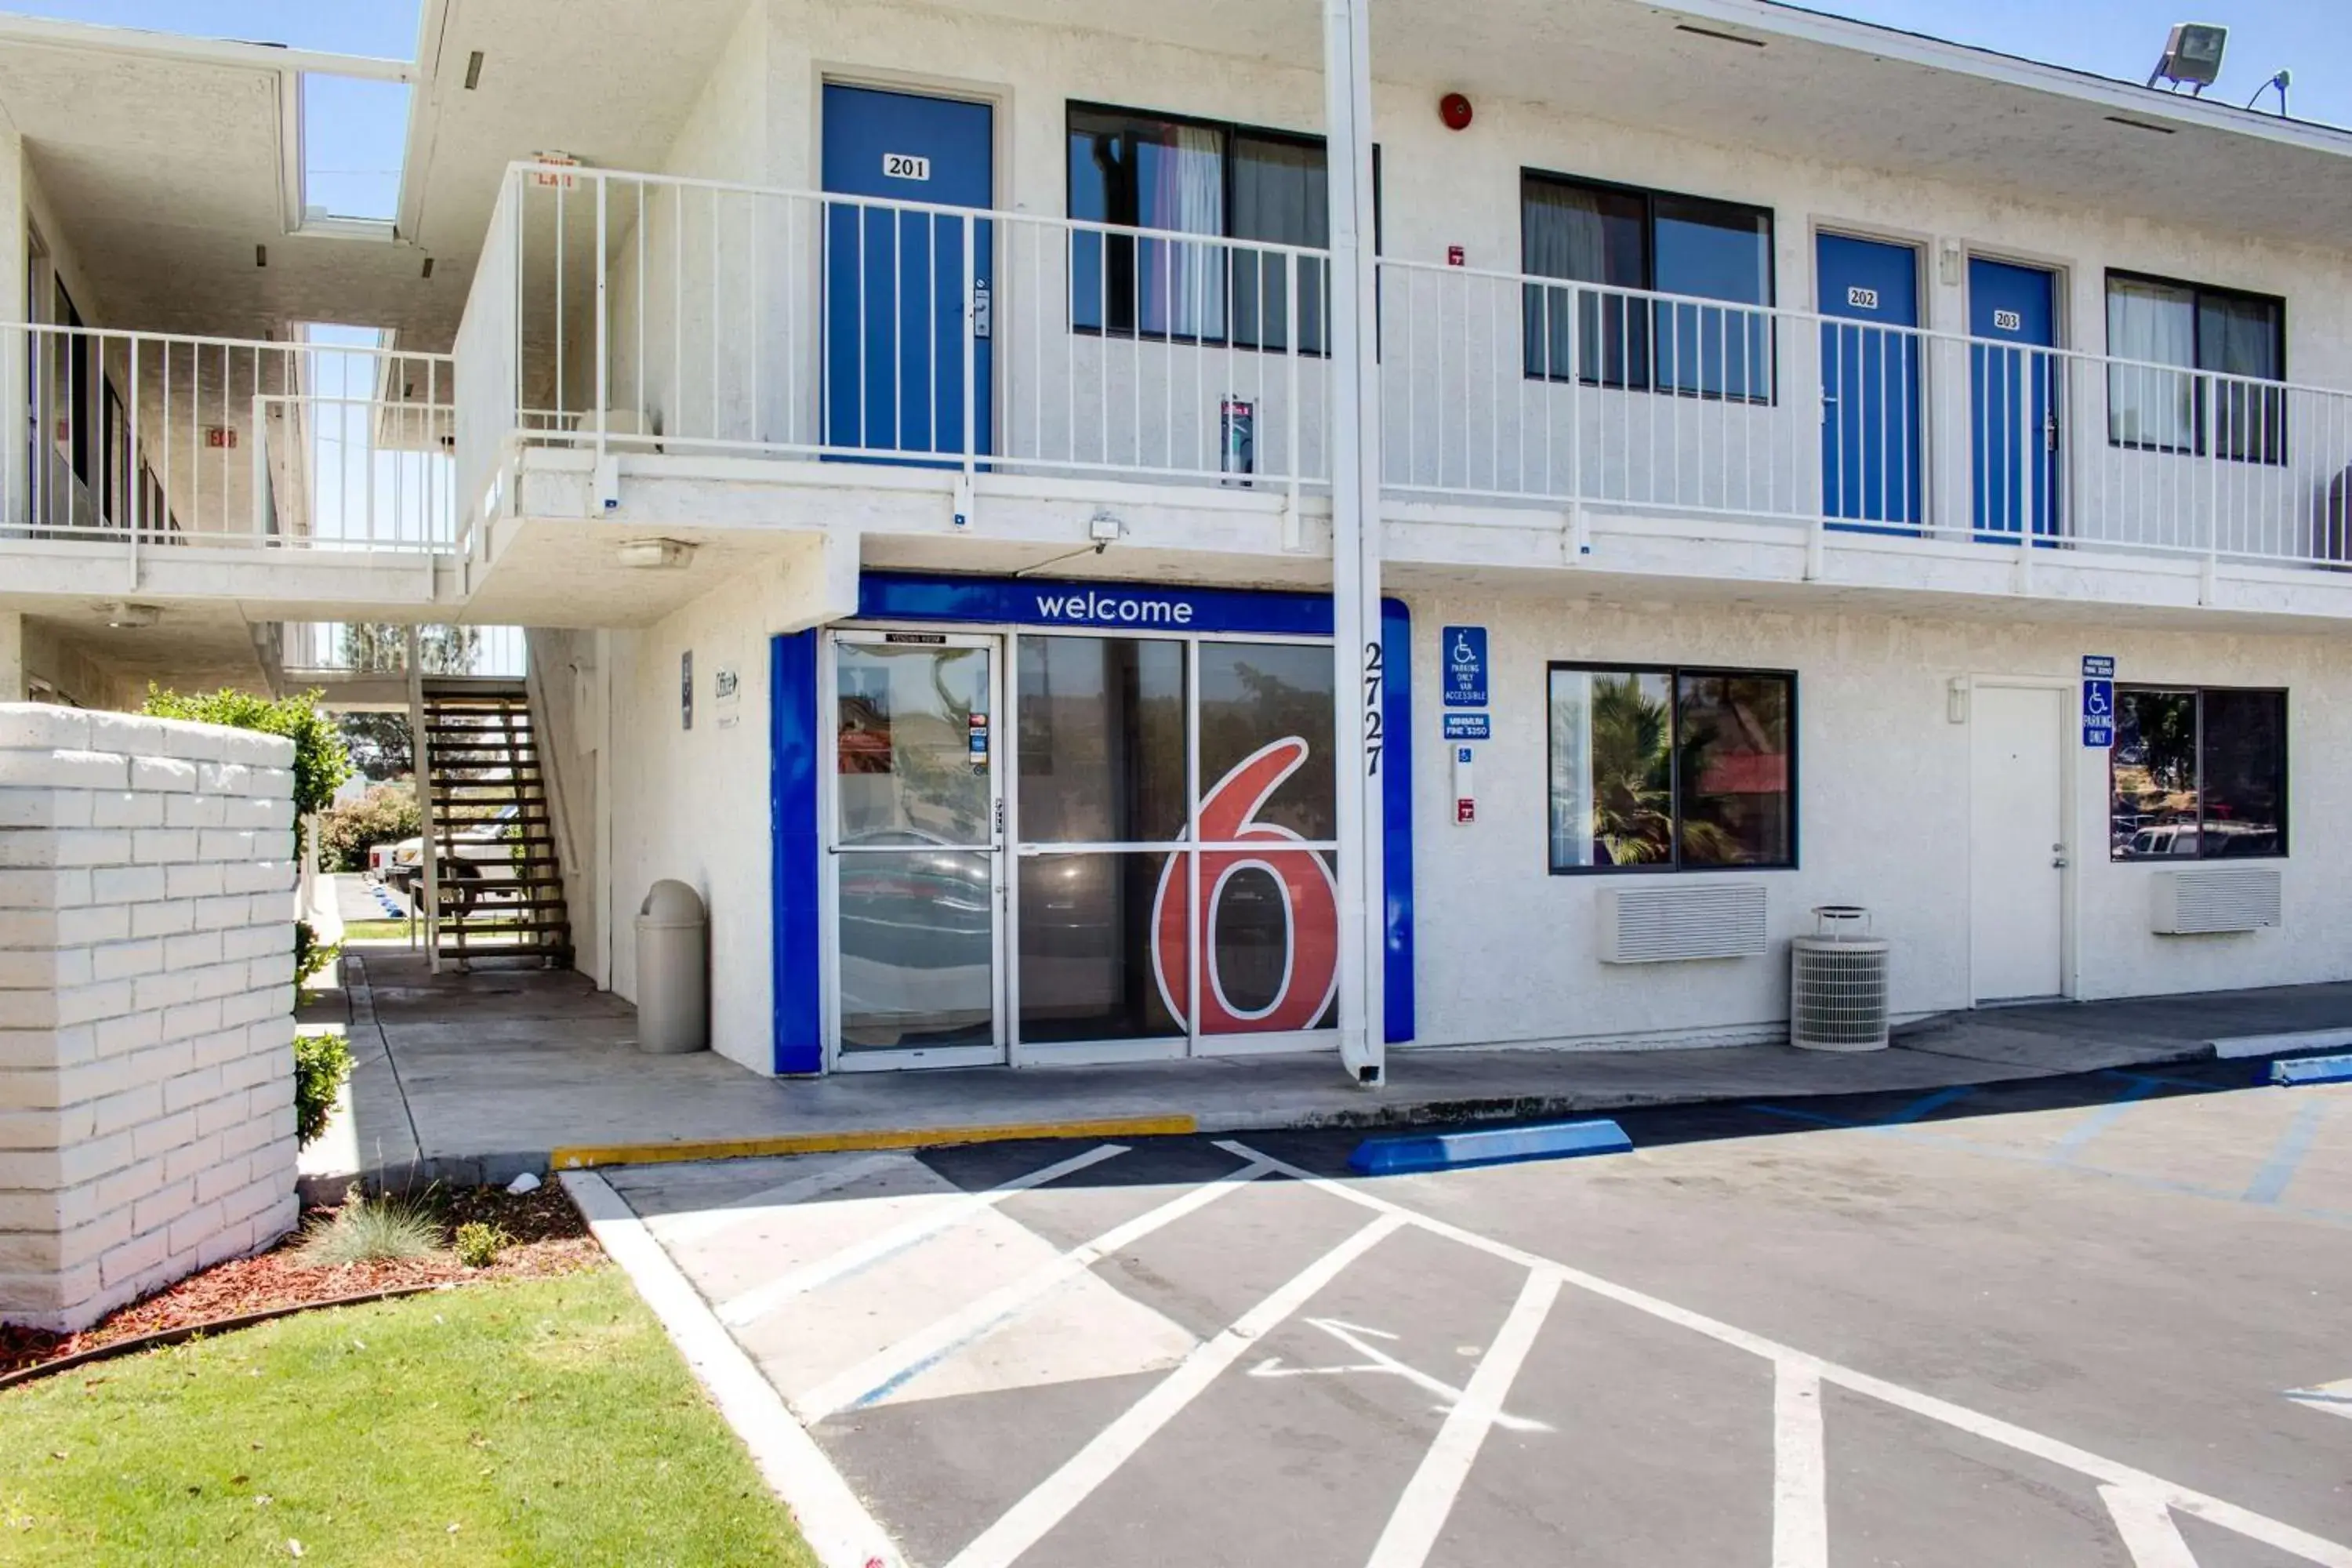 Property Building in Motel 6-Bakersfield, CA - South